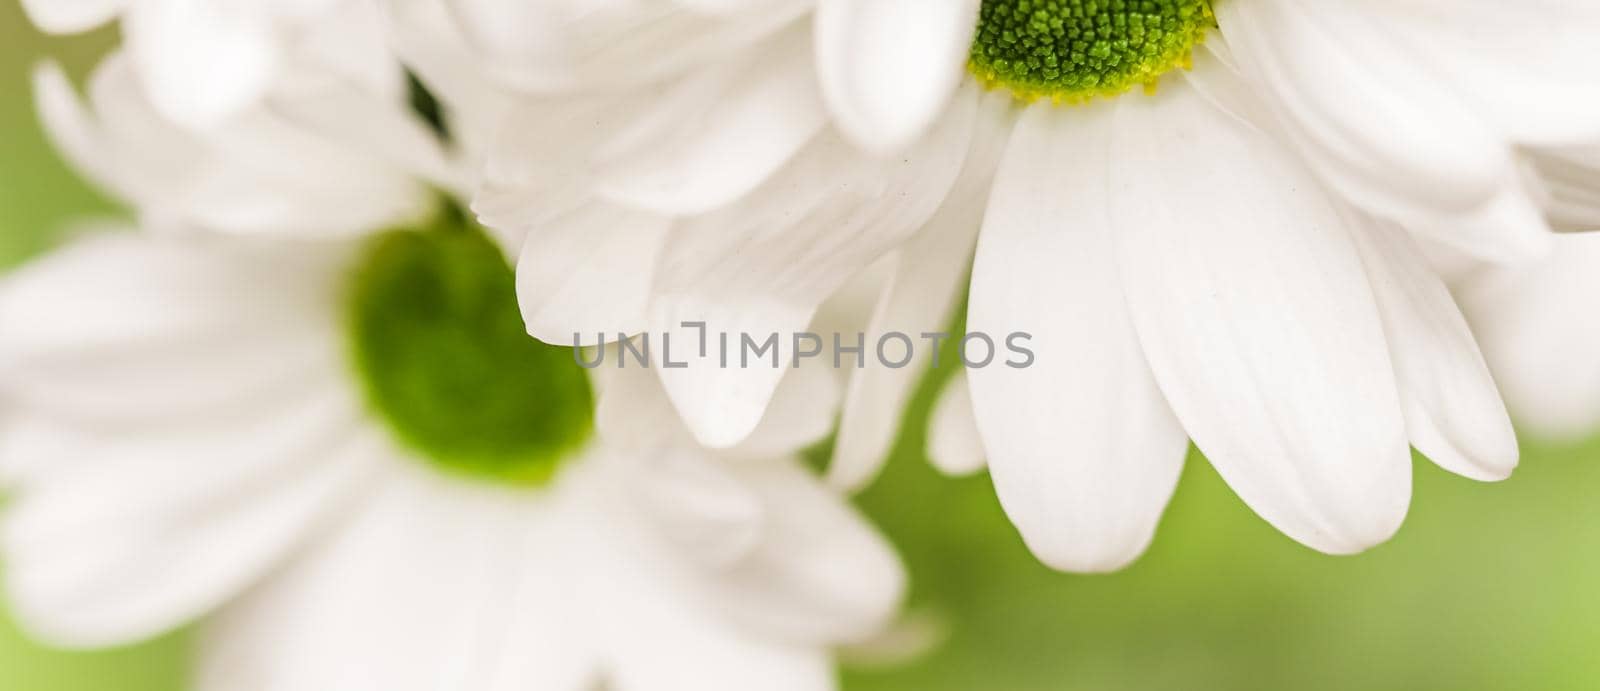 Soft focus, retro art, vintage card and botanical concept - Abstract floral background, white chrysanthemum flower petals. Macro flowers backdrop for holiday brand design